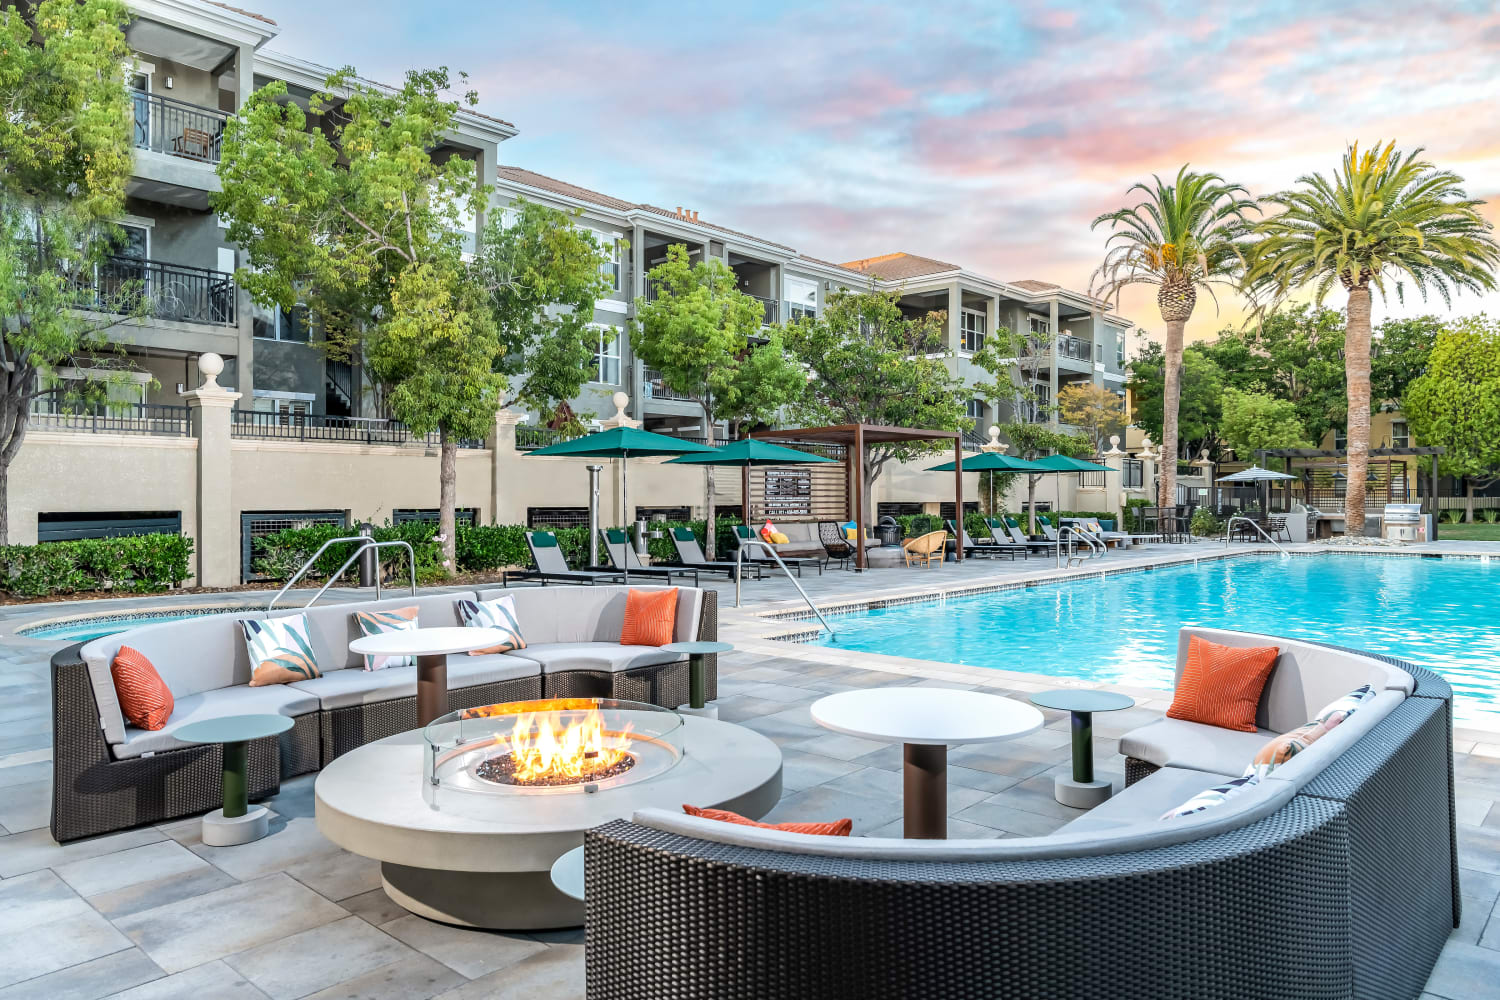 Exterior Poolside seating and gas firepit at The Carlyle in Santa Clara, California